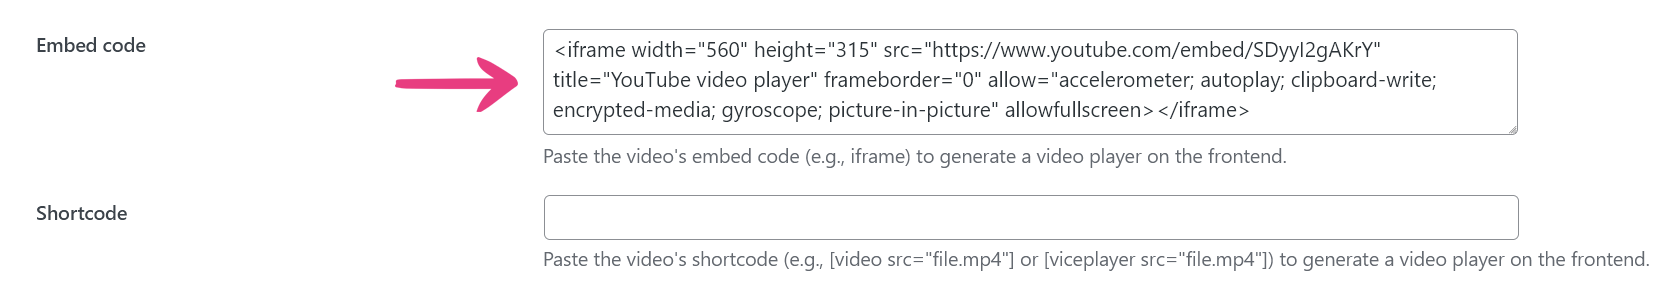 Paste Embed Code